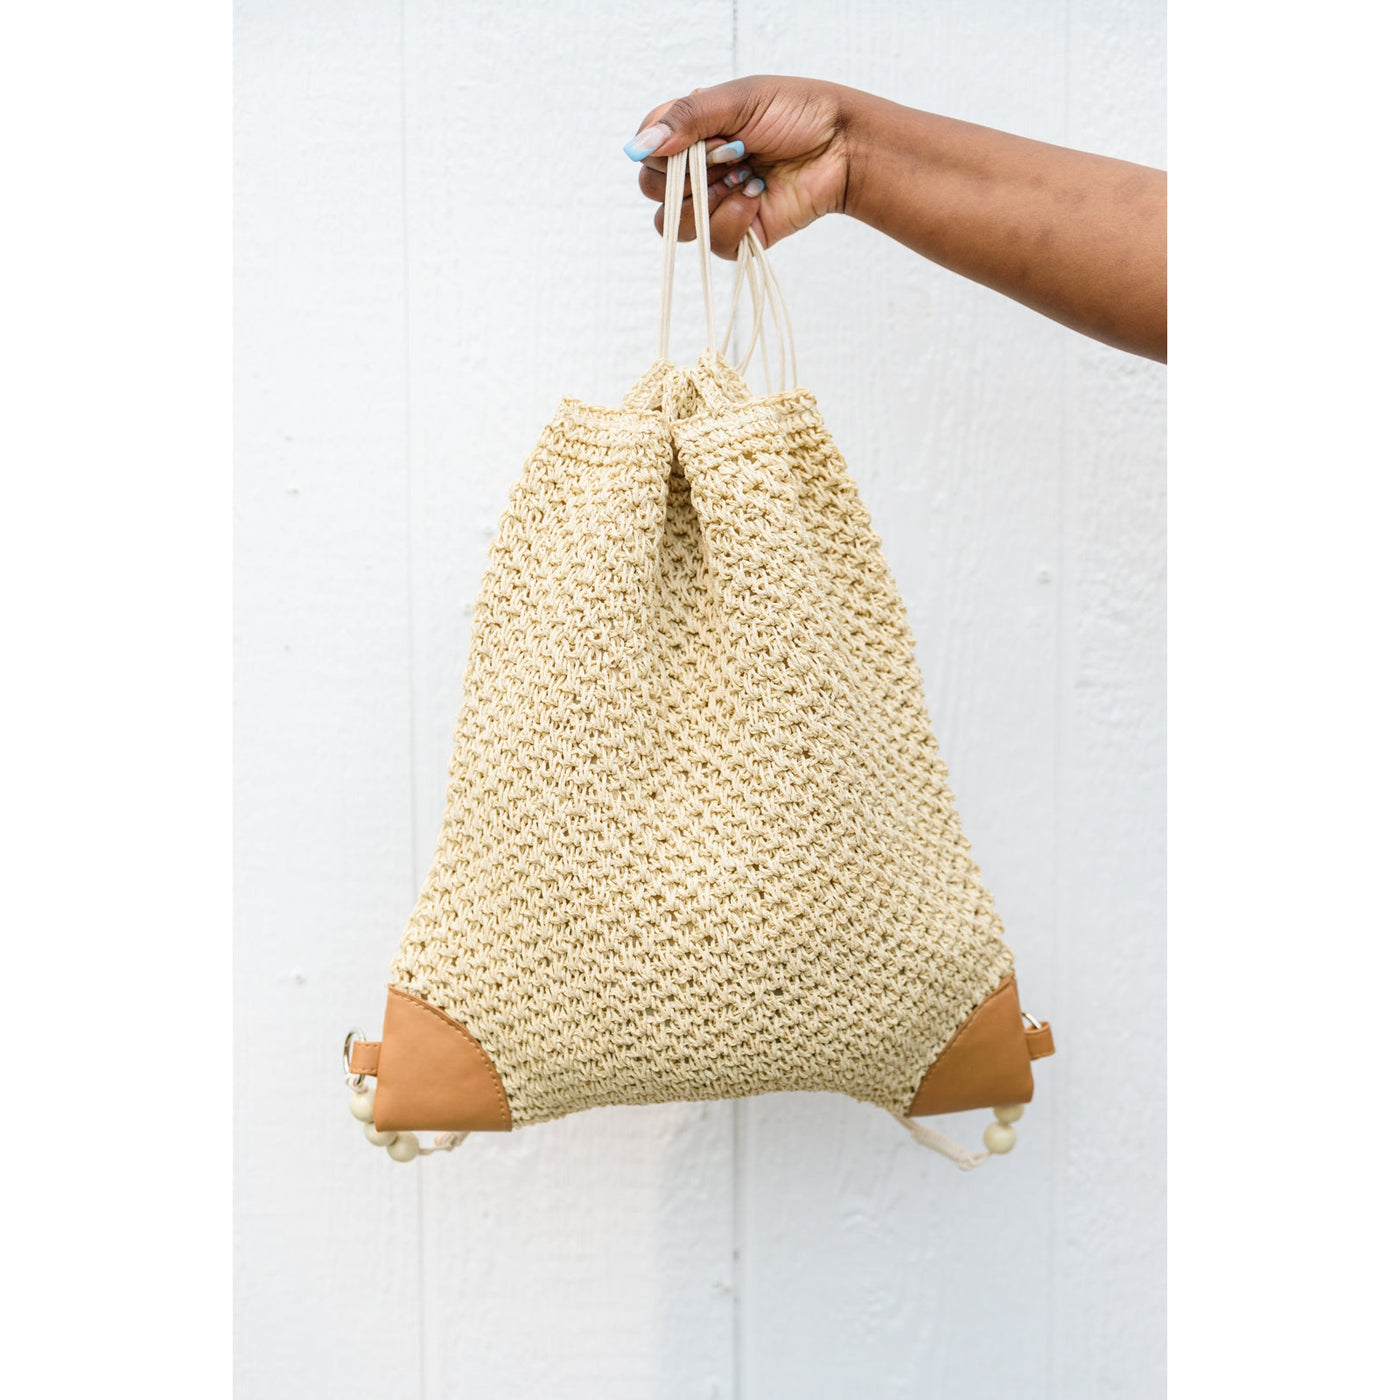 Crochet Backpack-Womens-Graceful & Chic Boutique, Family Clothing Store in Waxahachie, Texas